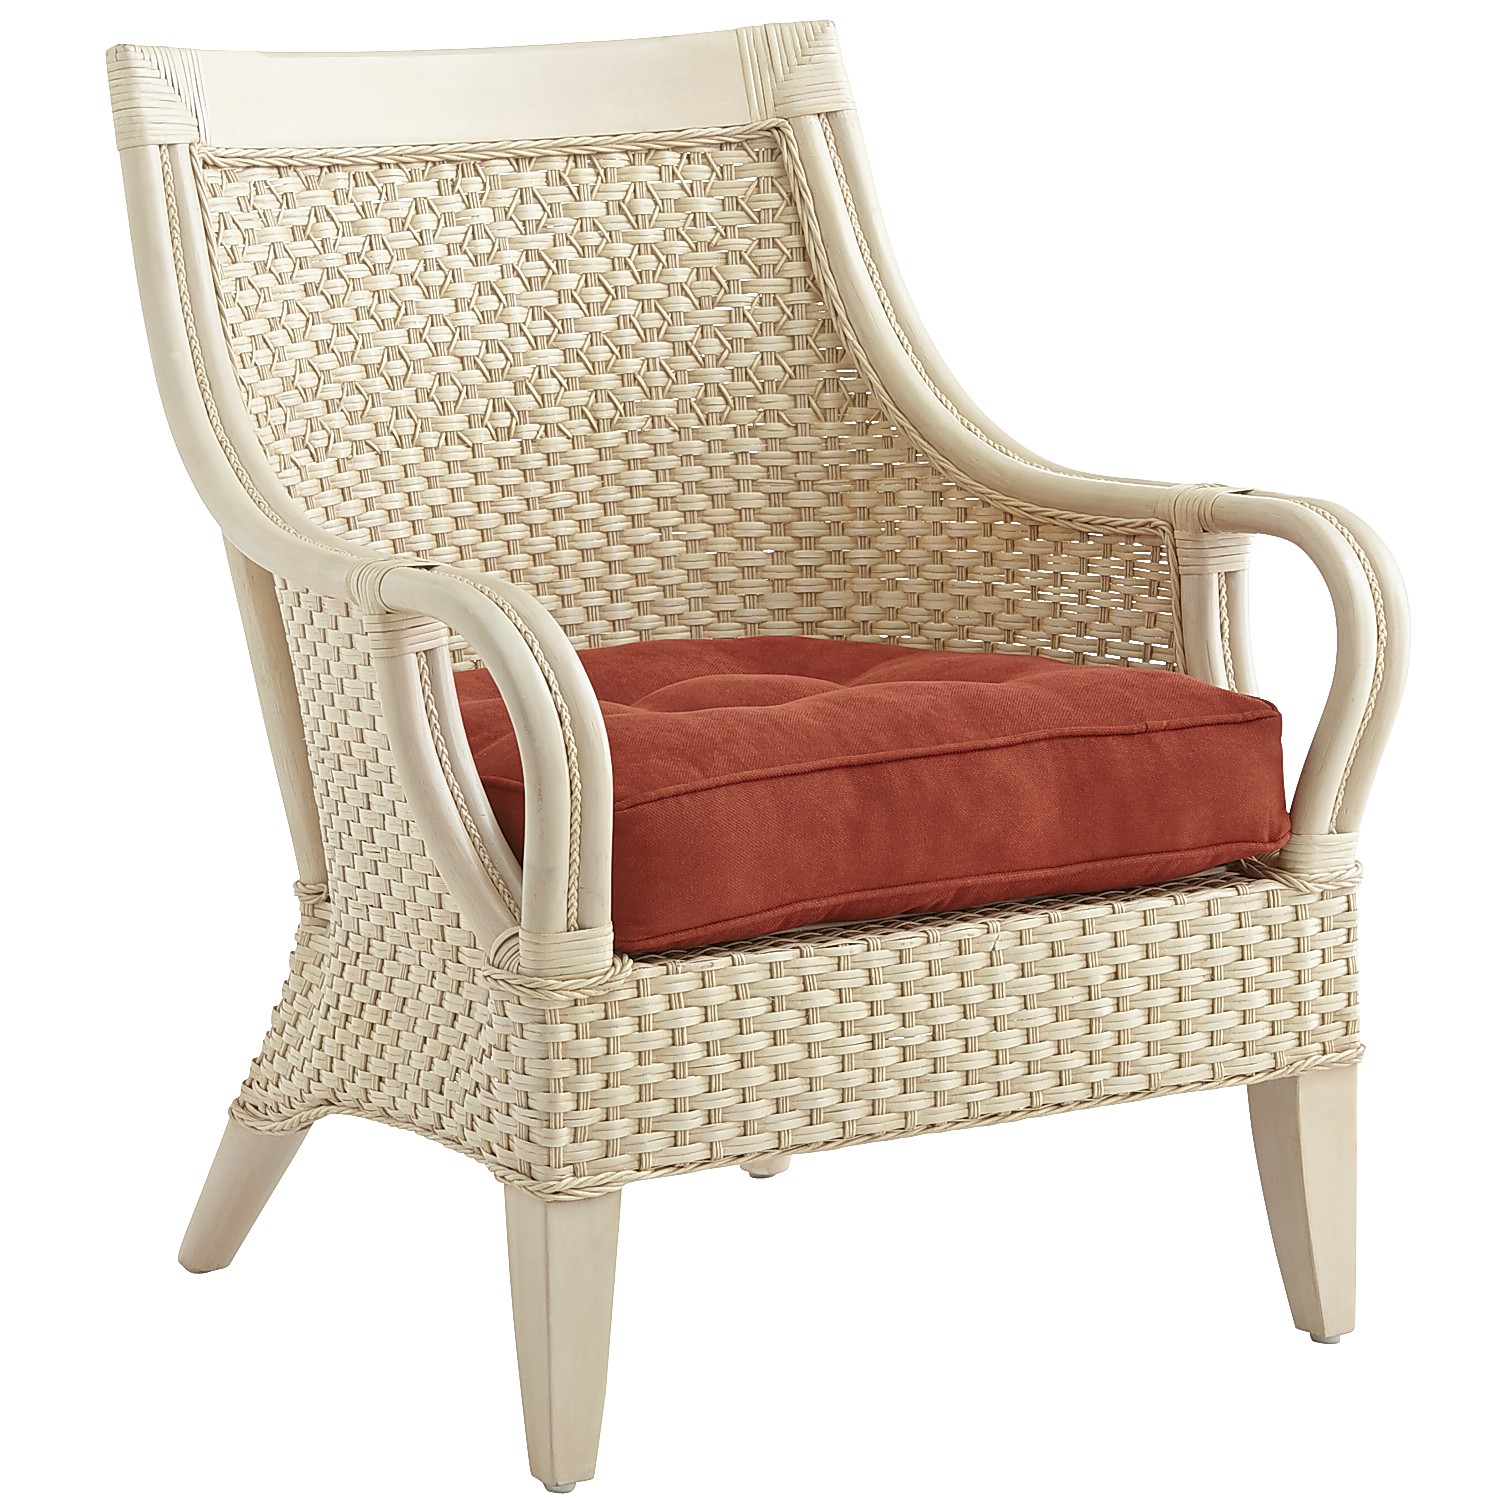 Temani ivory wicker chair, settee and ottoman